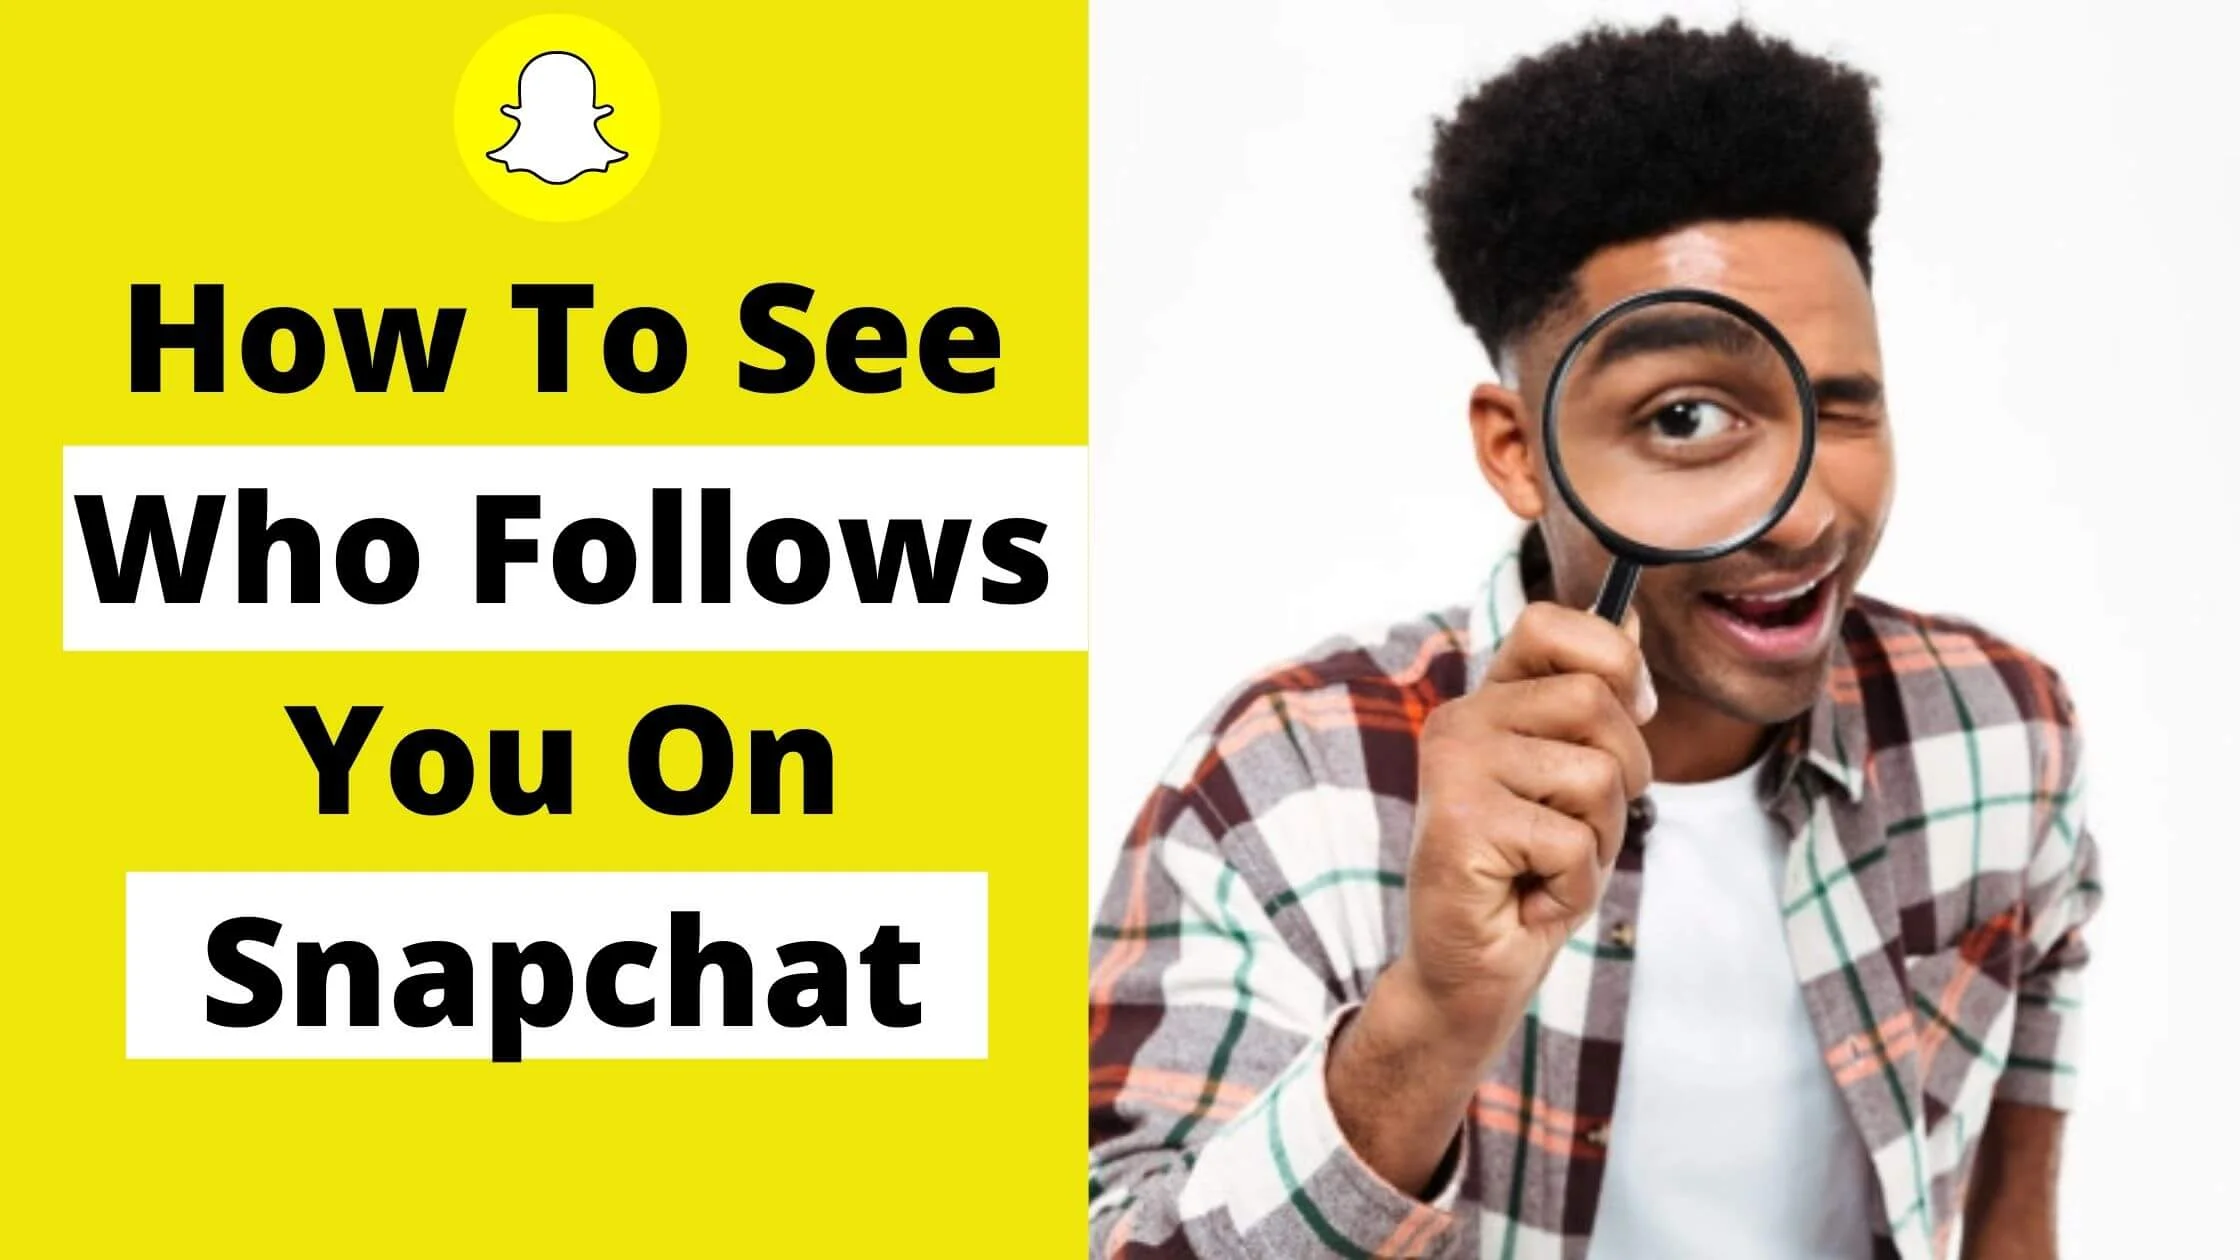 How To See Who Follows You On Snapchat